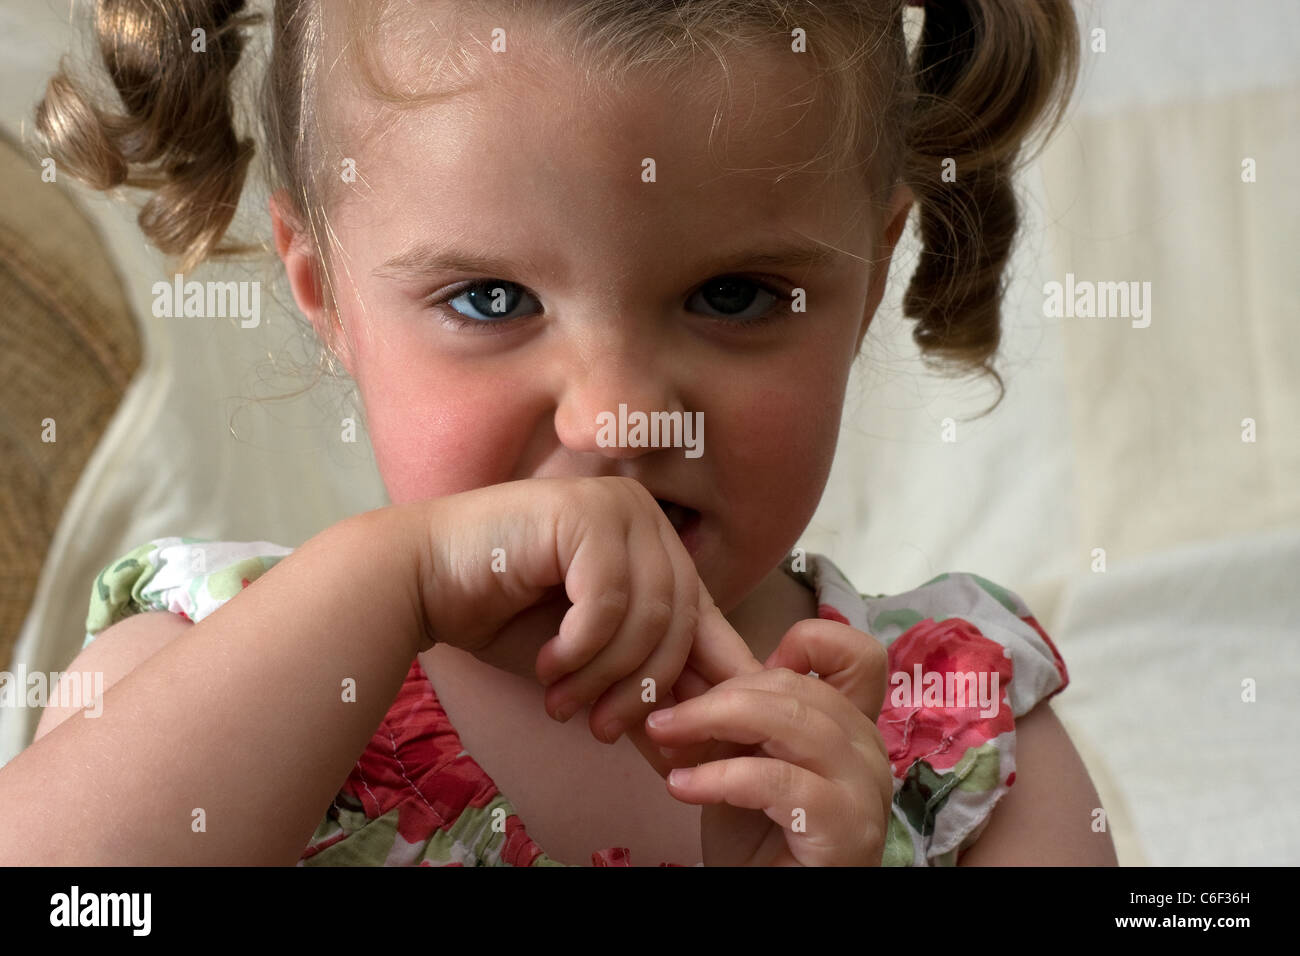 young toddlers girl smile smiling cute scowl Stock Photo